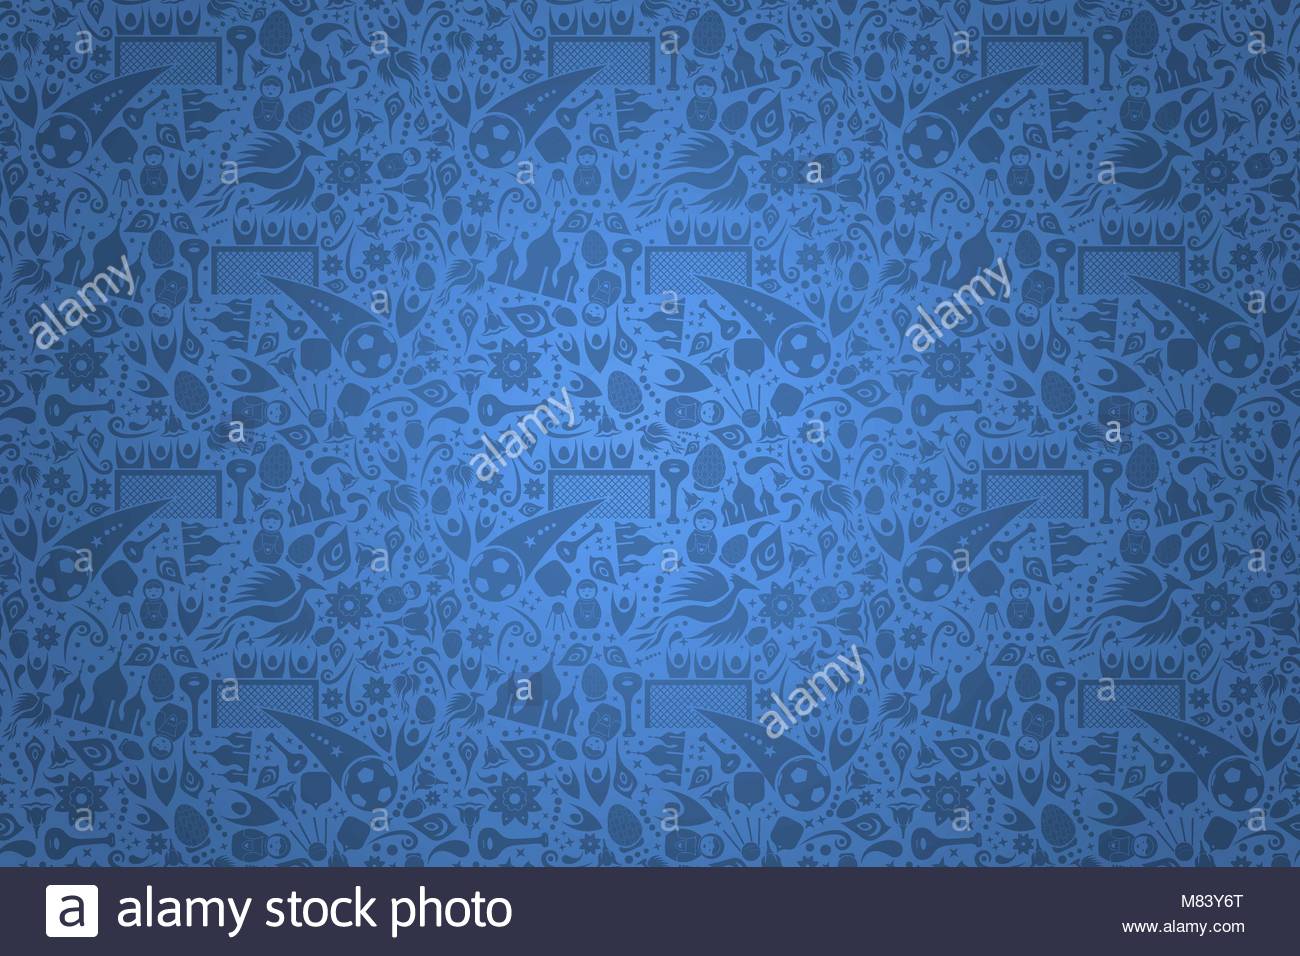 Russia symbol decoration background in blue color Traditional